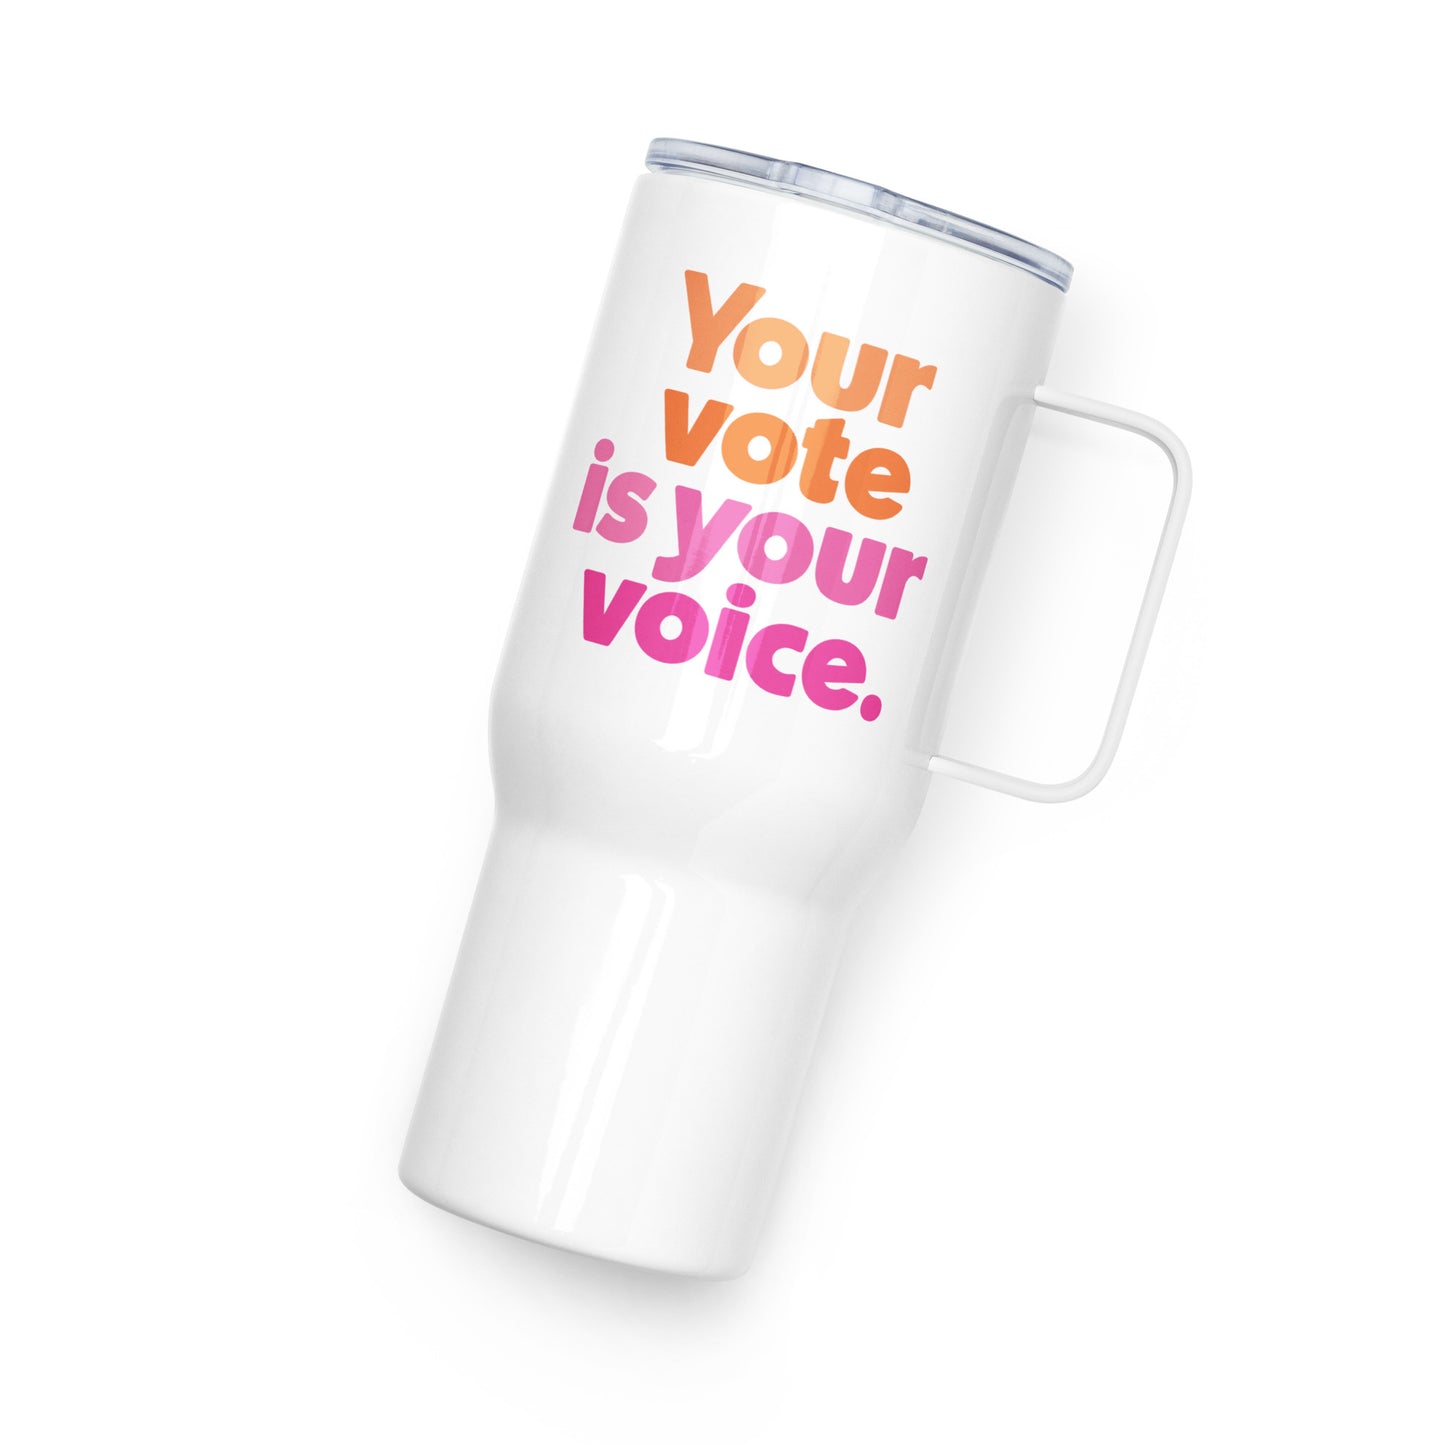 Your vote is your voice - Travel Mug